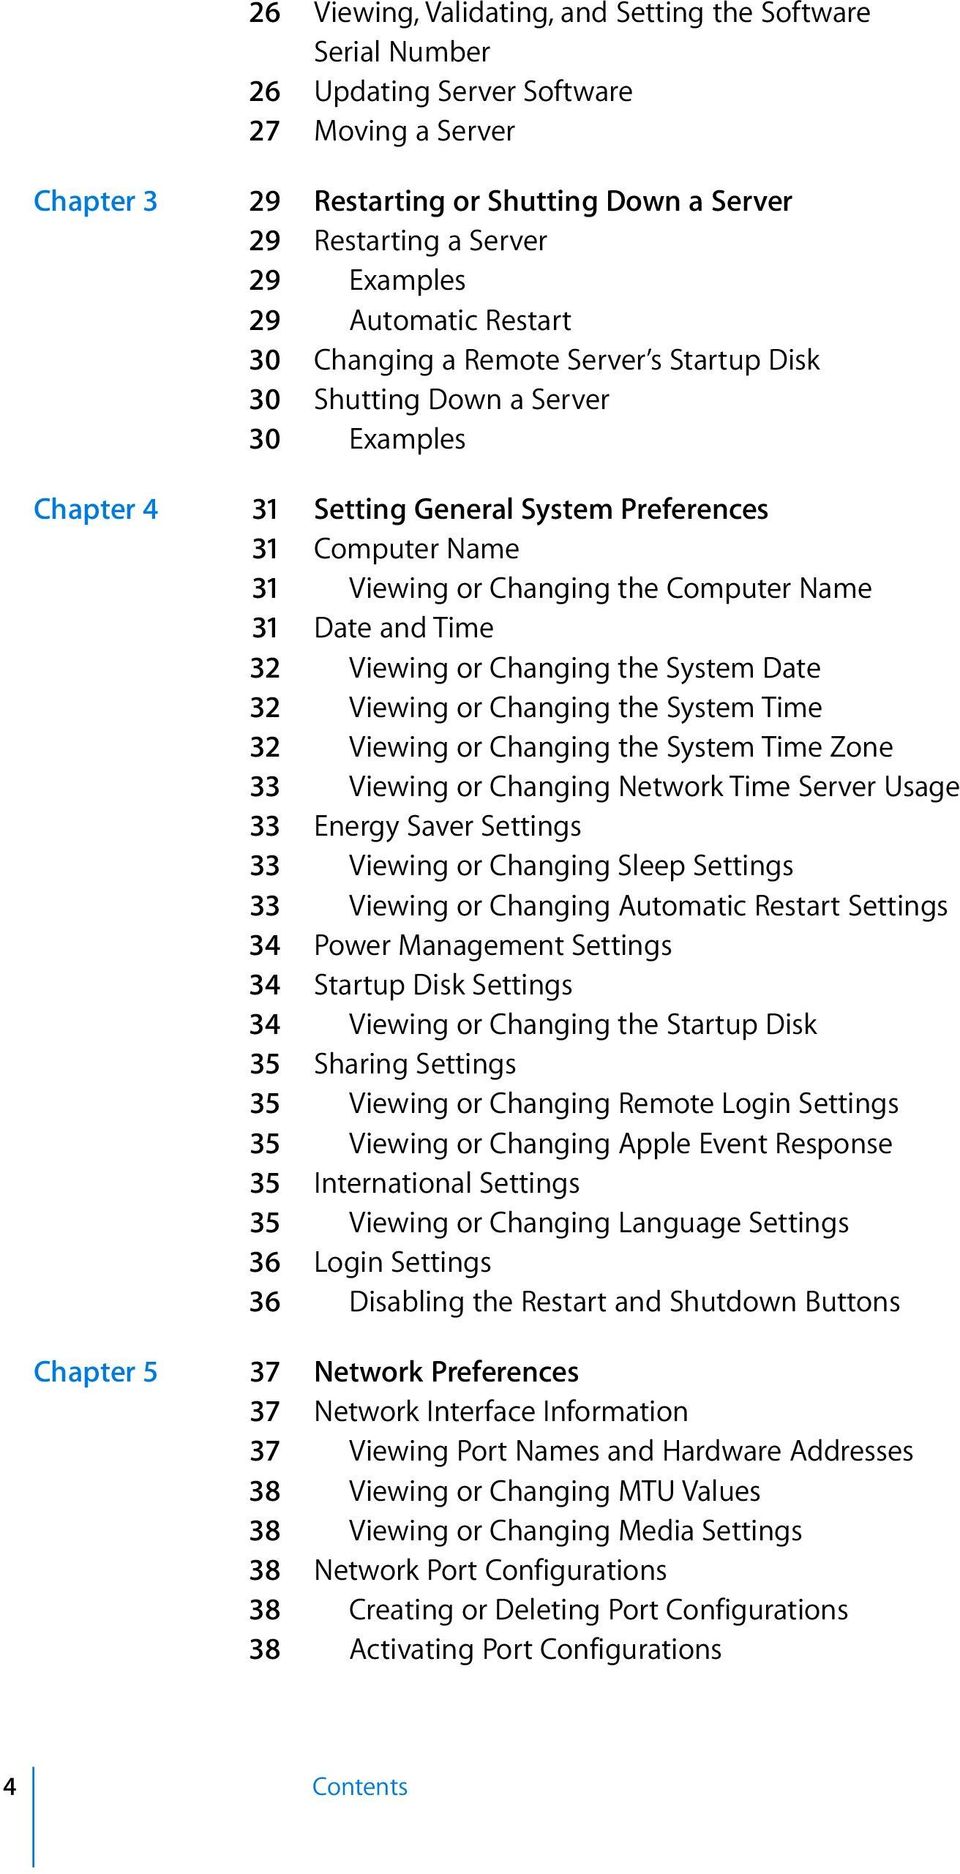 Name 31 Date and Time 32 Viewing or Changing the System Date 32 Viewing or Changing the System Time 32 Viewing or Changing the System Time Zone 33 Viewing or Changing Network Time Server Usage 33